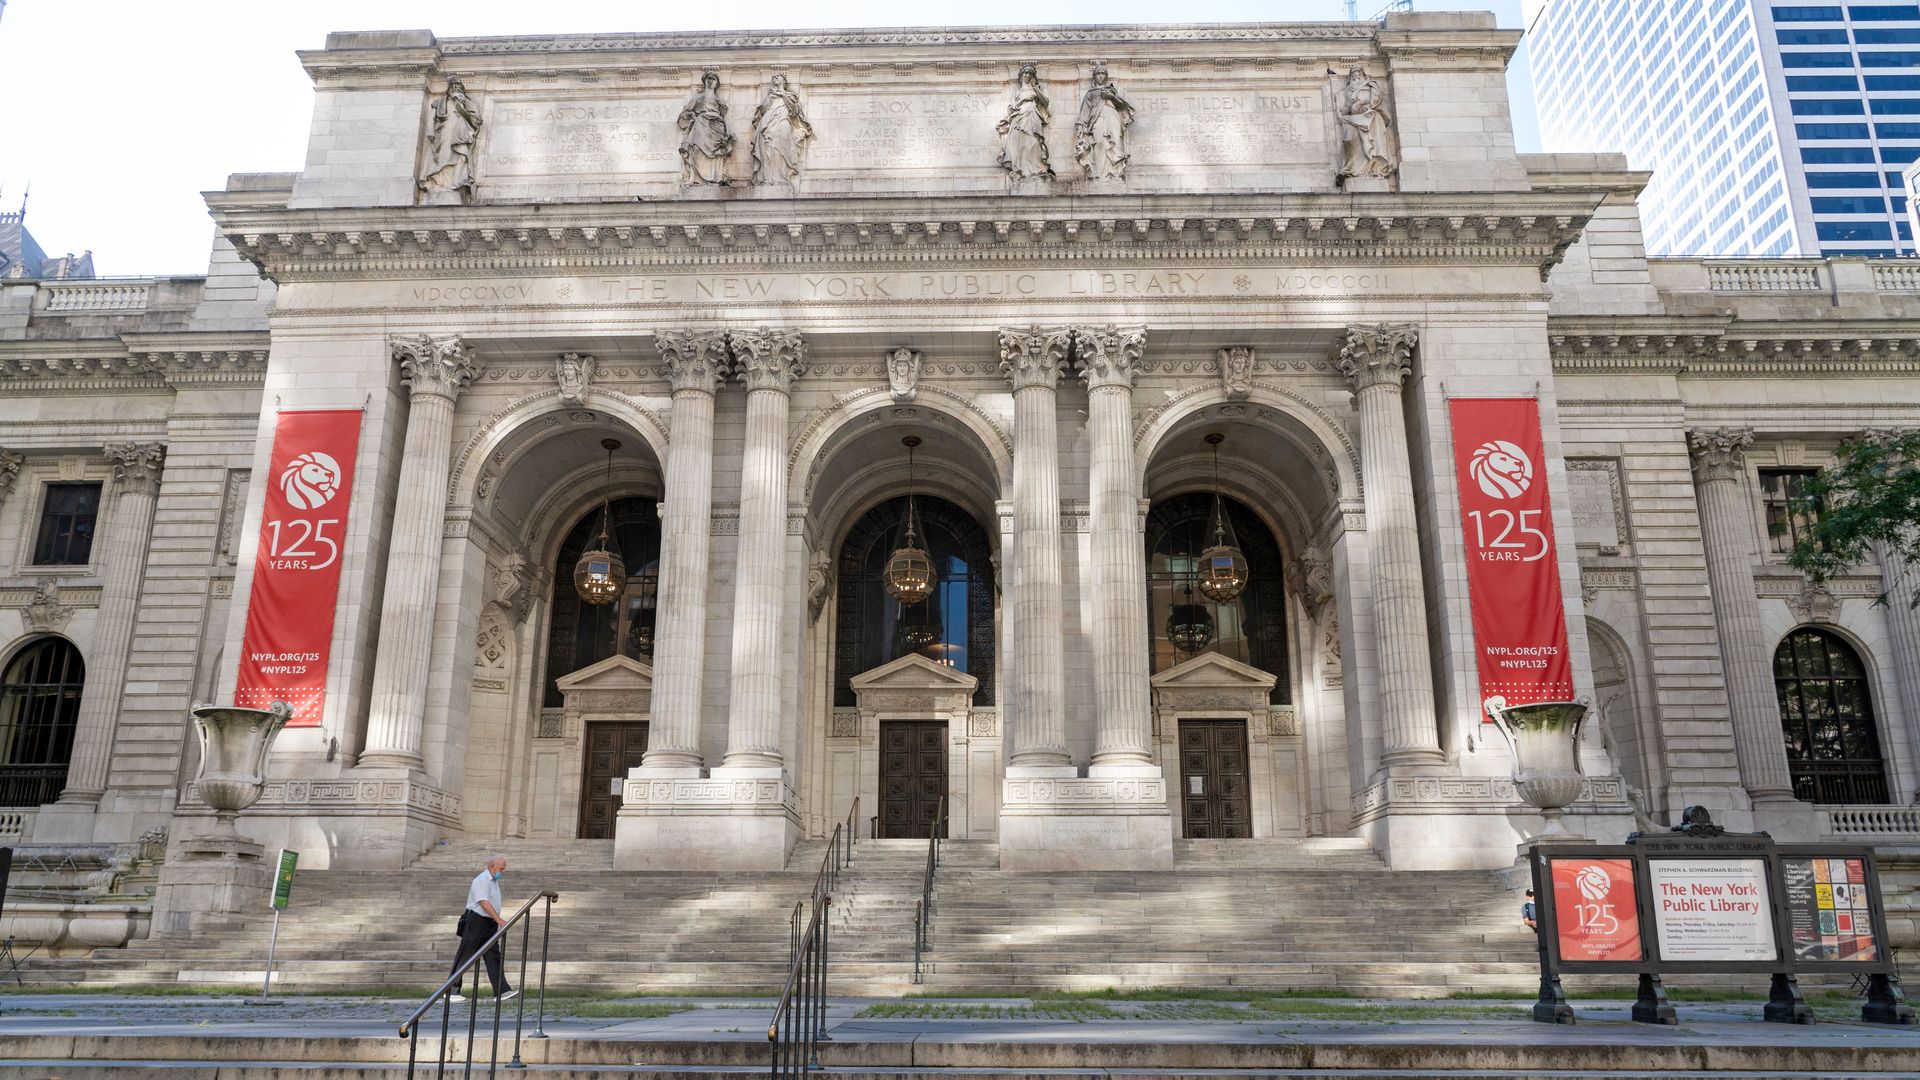 An exterior view of New York Public Library on Fifth Ave in New York. 